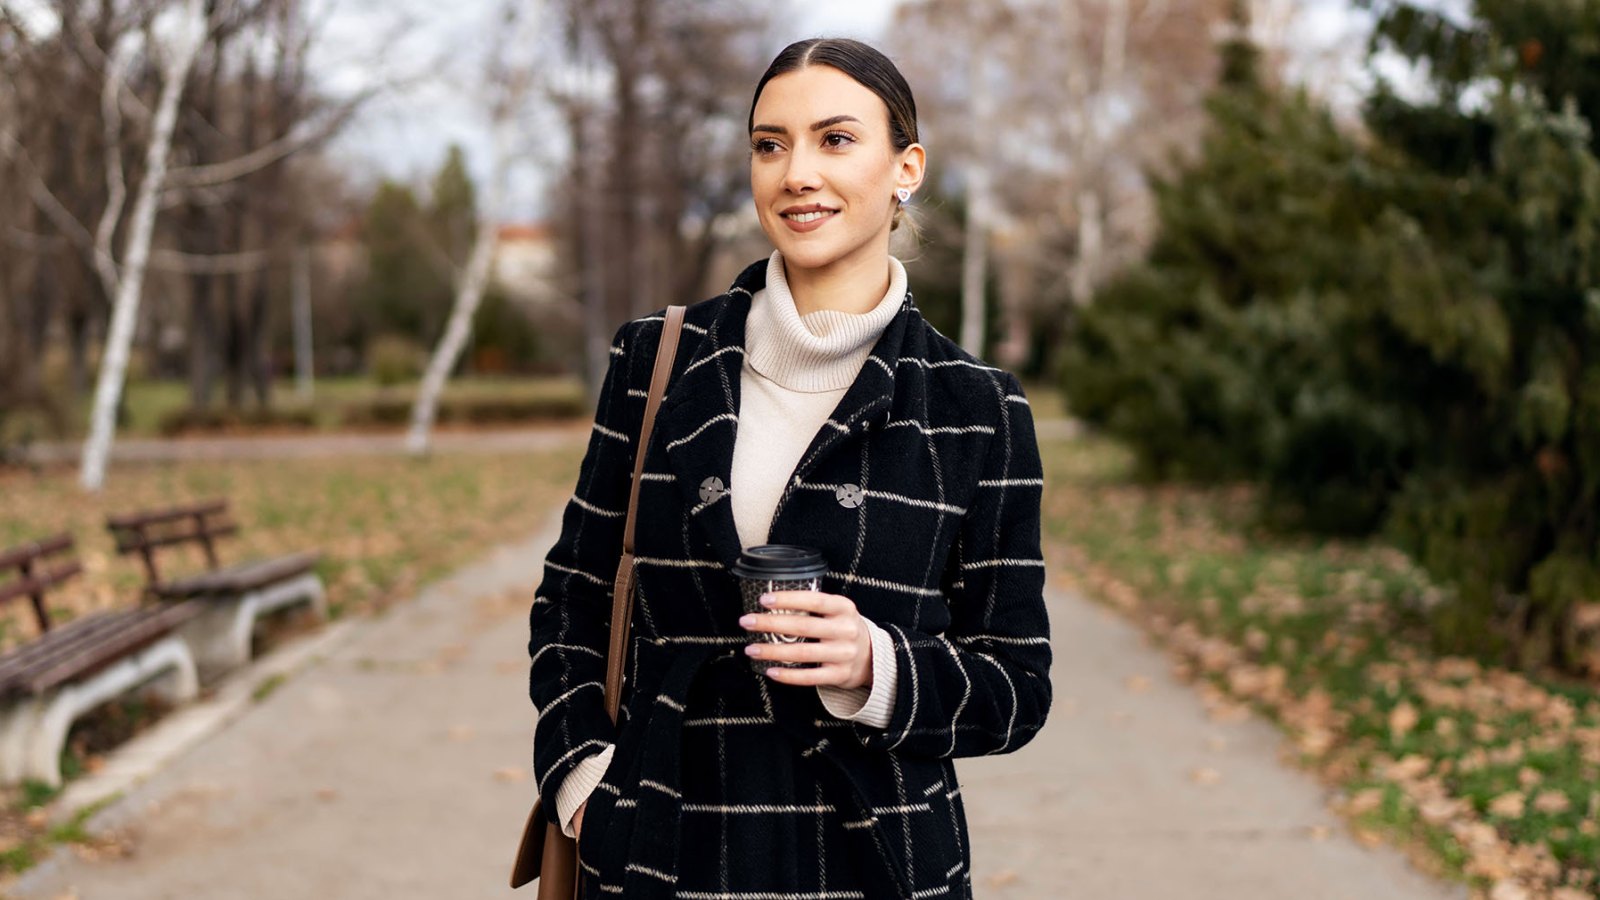 A Seriously Dreamy Fall Coat To Throw On & Go - The Mom Edit